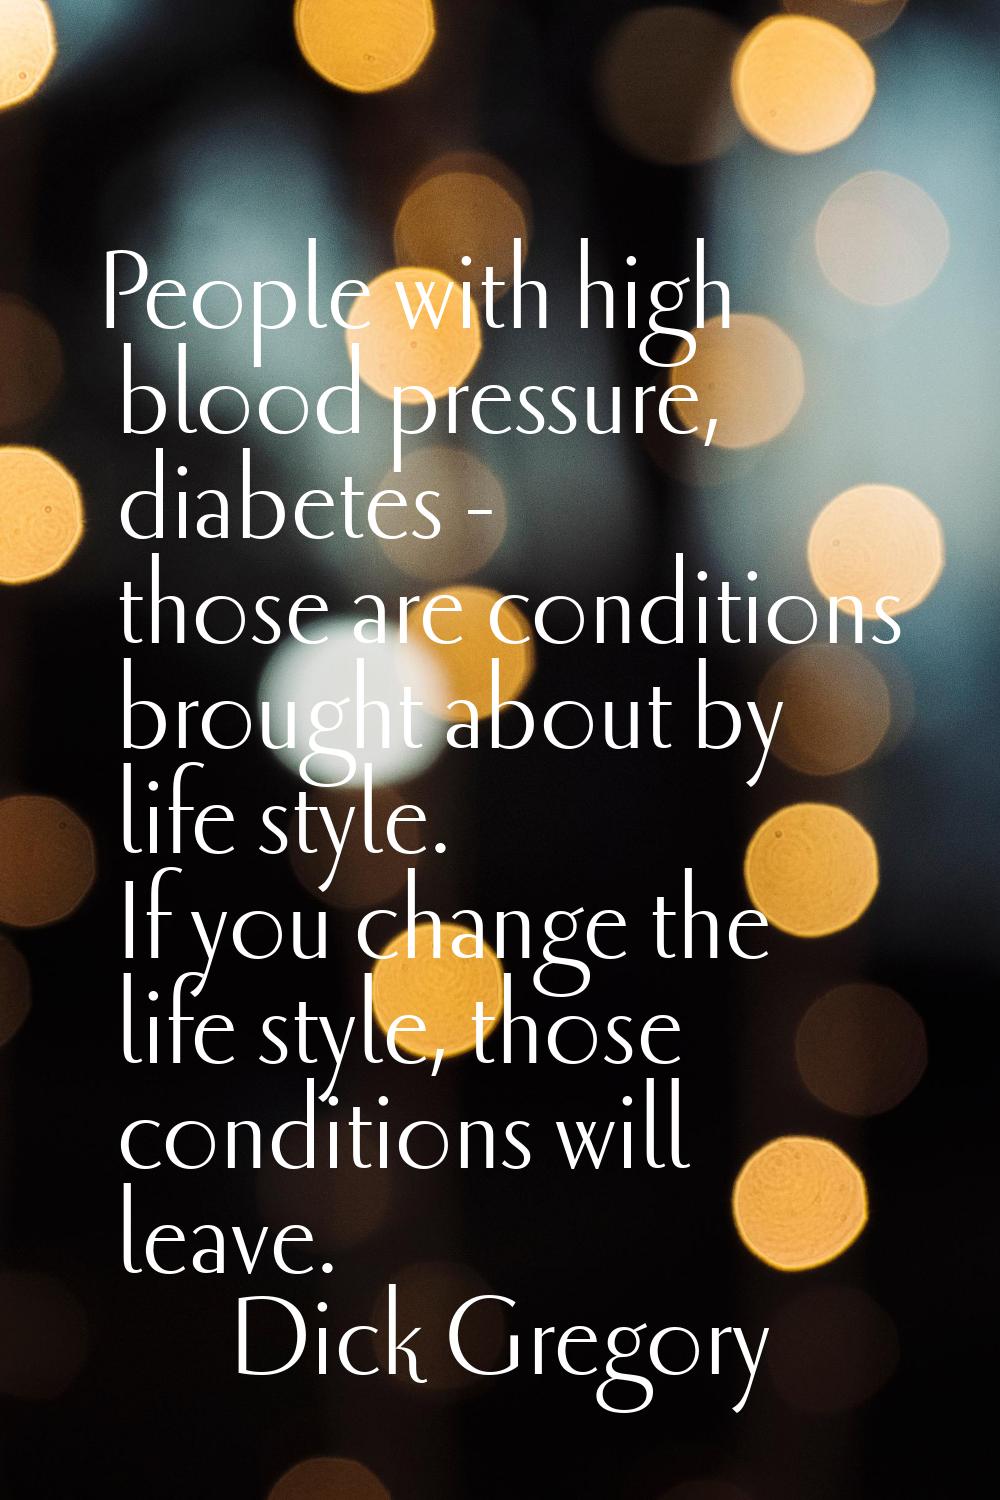 People with high blood pressure, diabetes - those are conditions brought about by life style. If yo